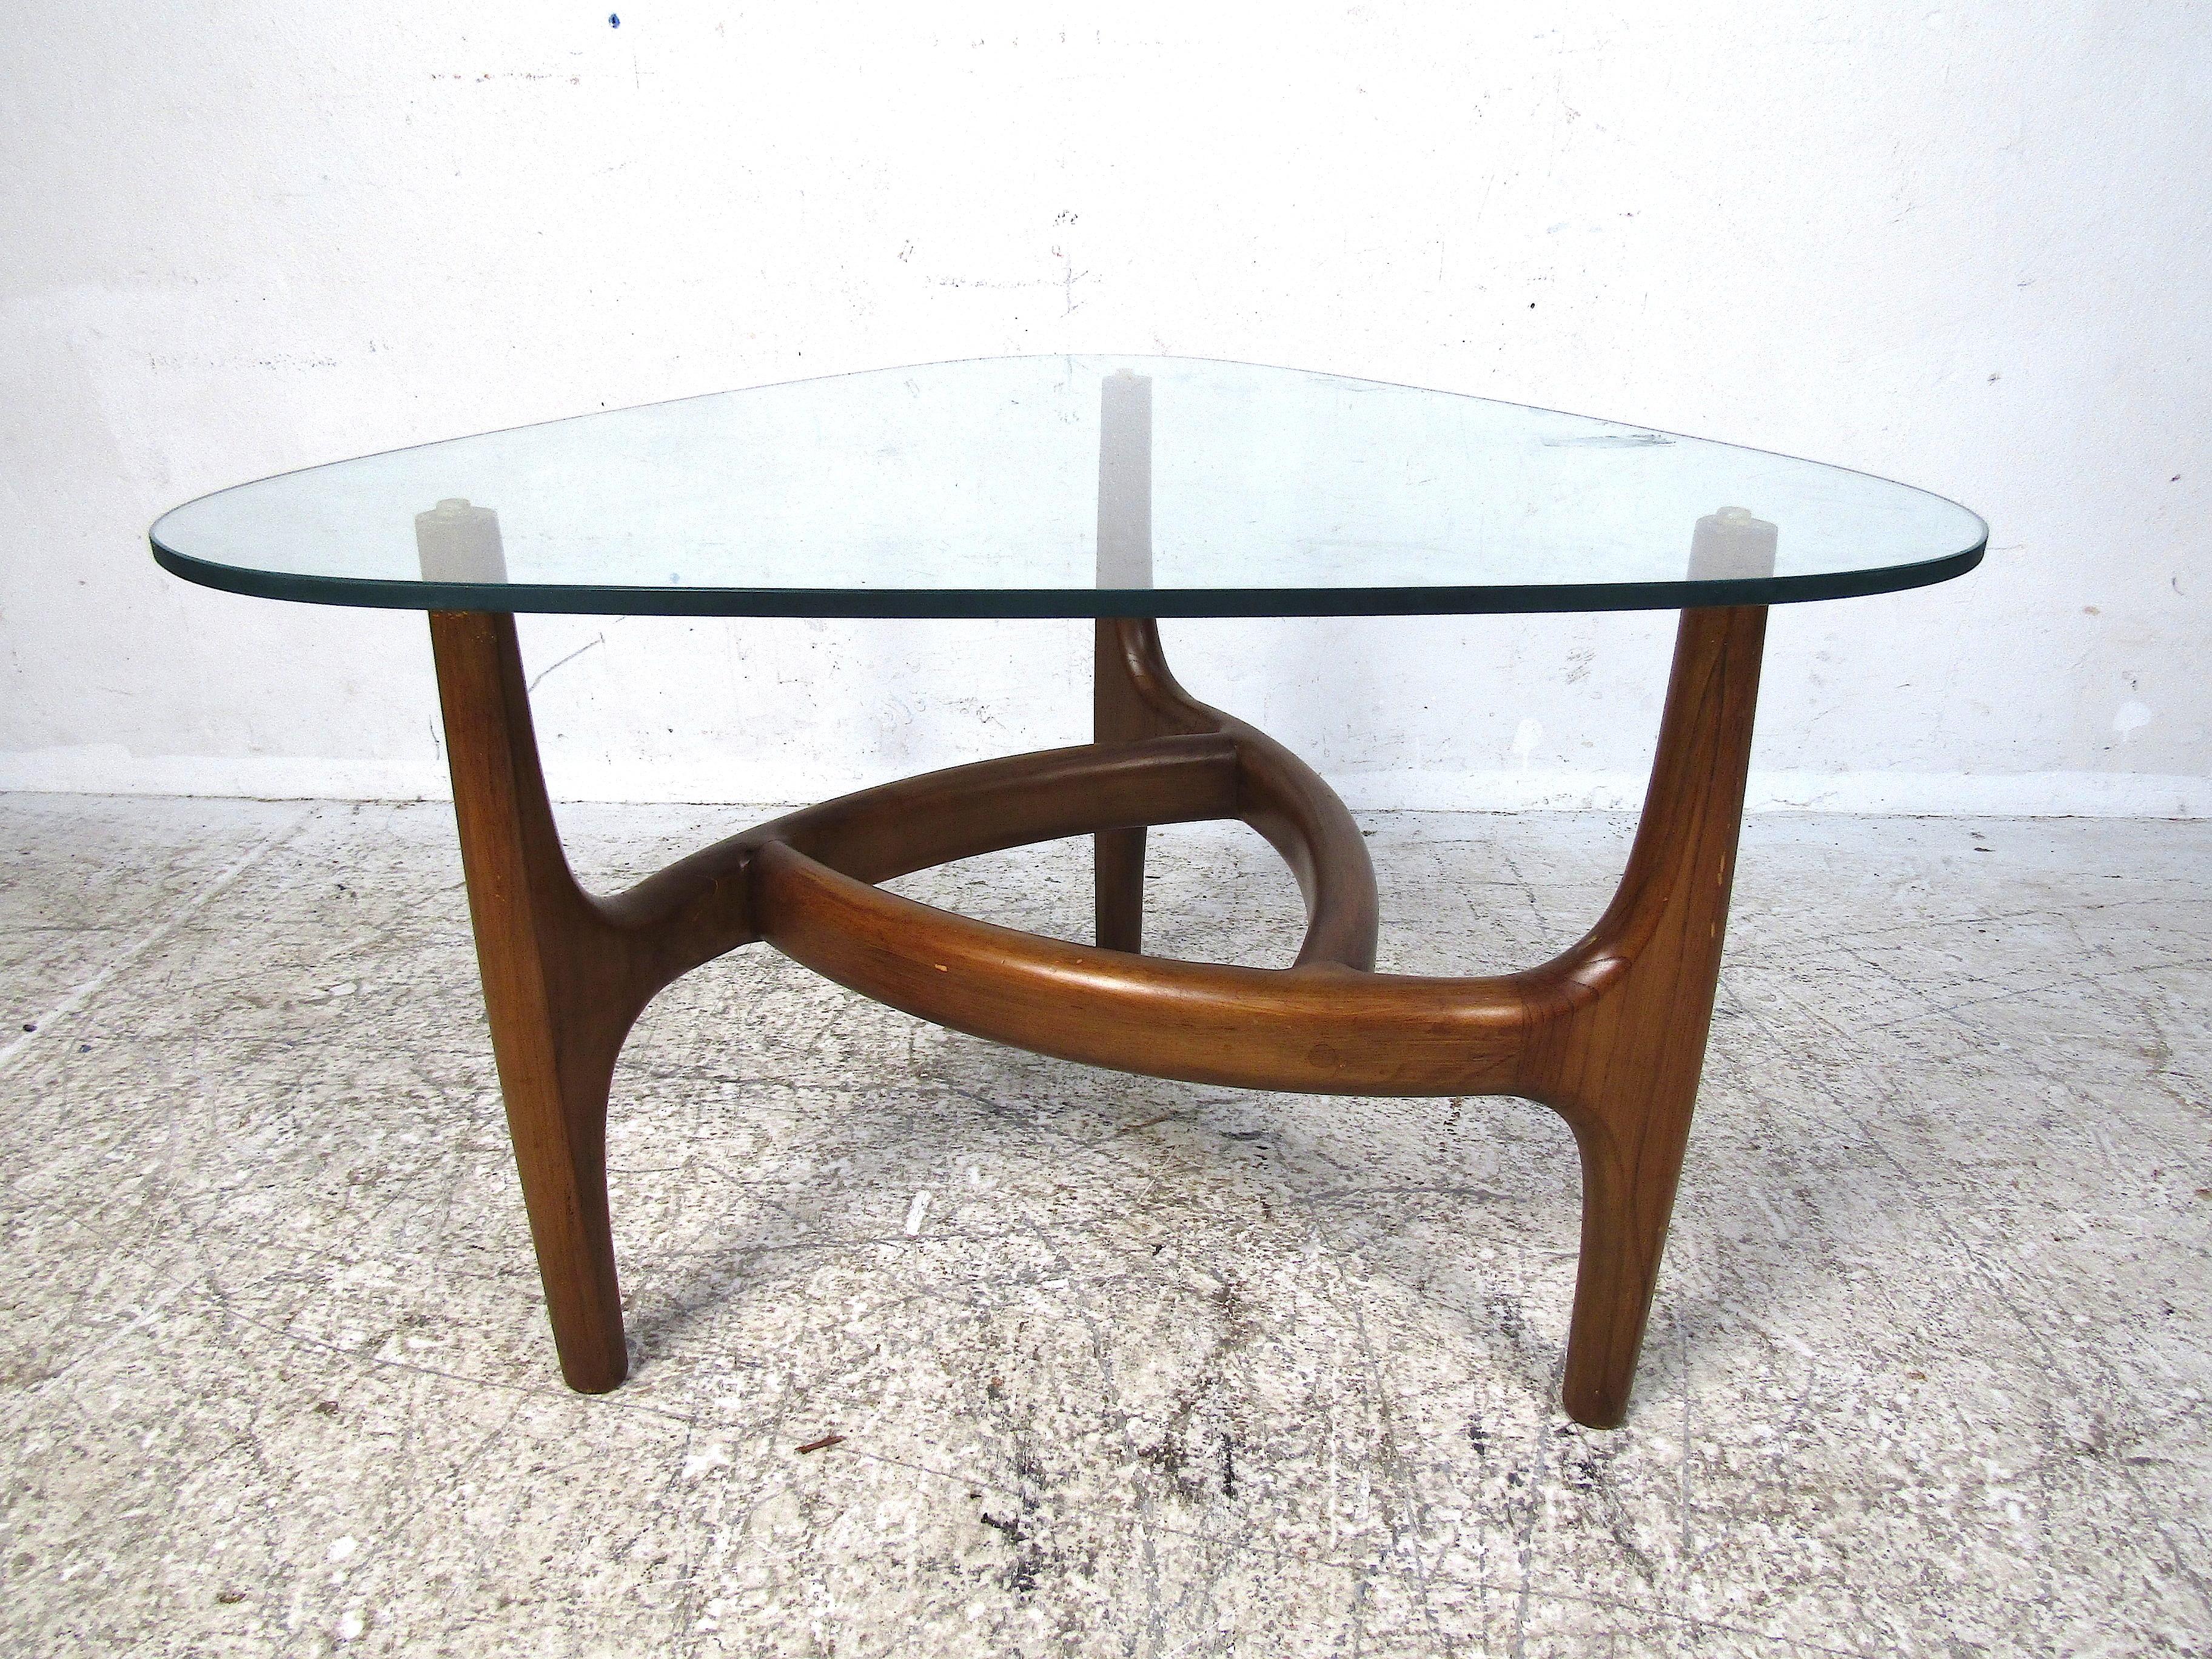 Stylish midcentury coffee table. Sculpted wooden frame with a triangular 3/8ths inch thick pane of glass with rounded edges serving as the tabletop. Designed by Adrian Pearsall for Craft Associates. Please confirm the item's location with the dealer